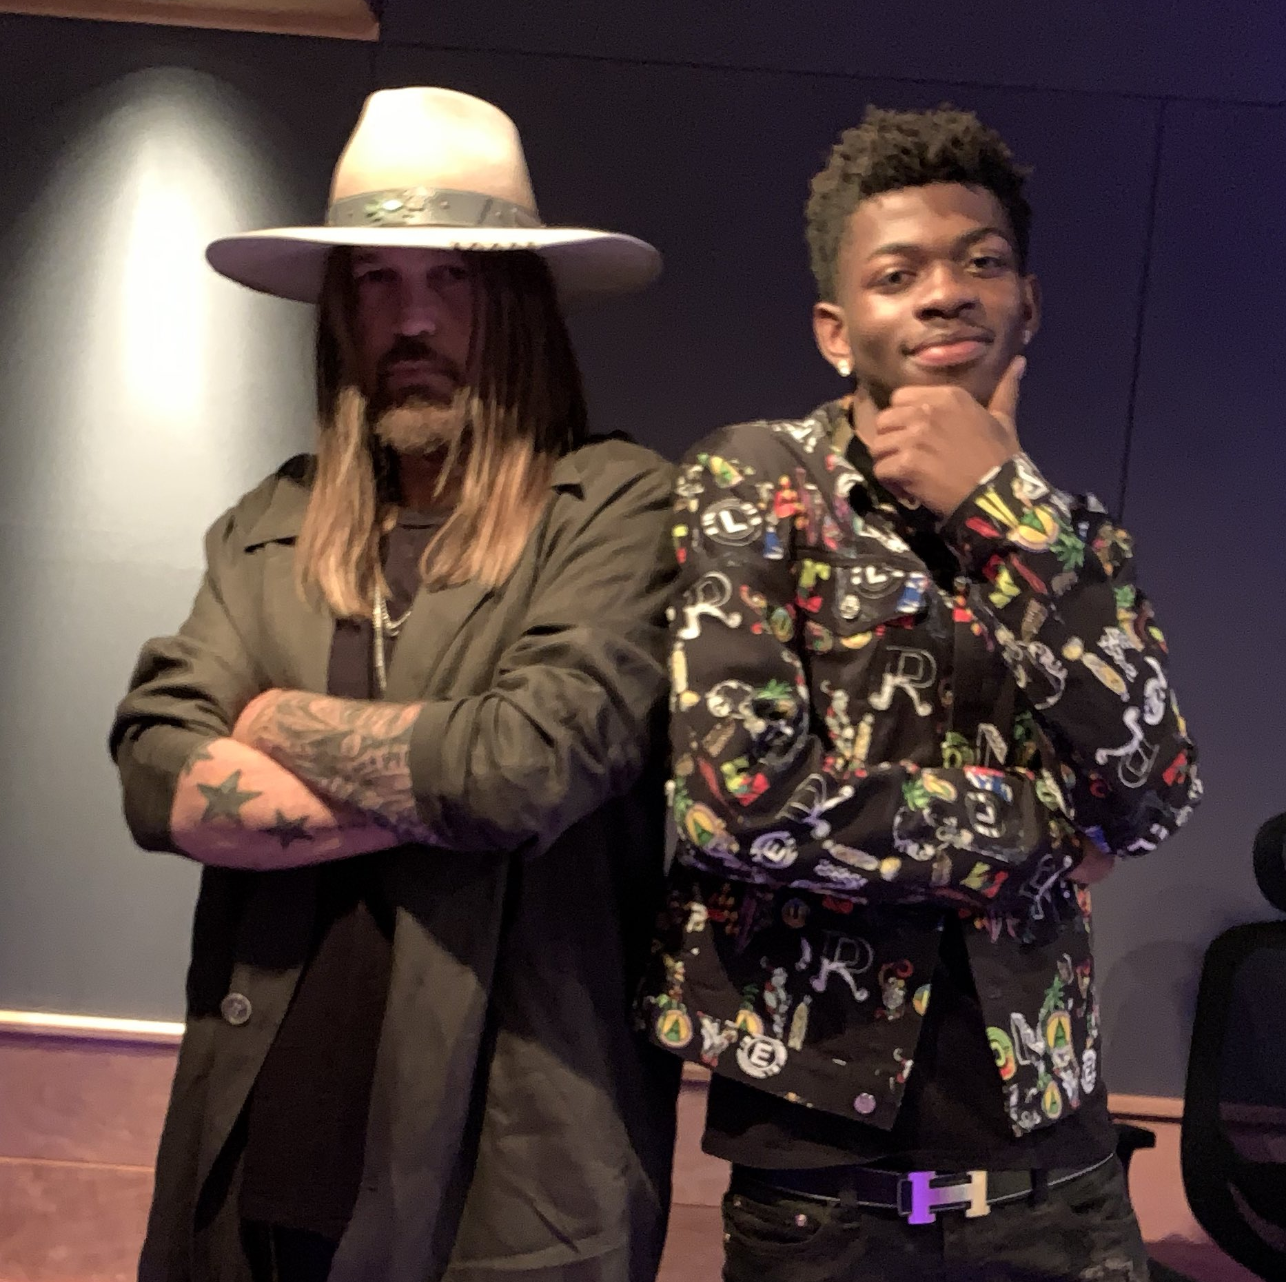 Billy cyrus old town. Lil nas x Billy ray Cyrus old. Billy ray Cyrus old Town Road.